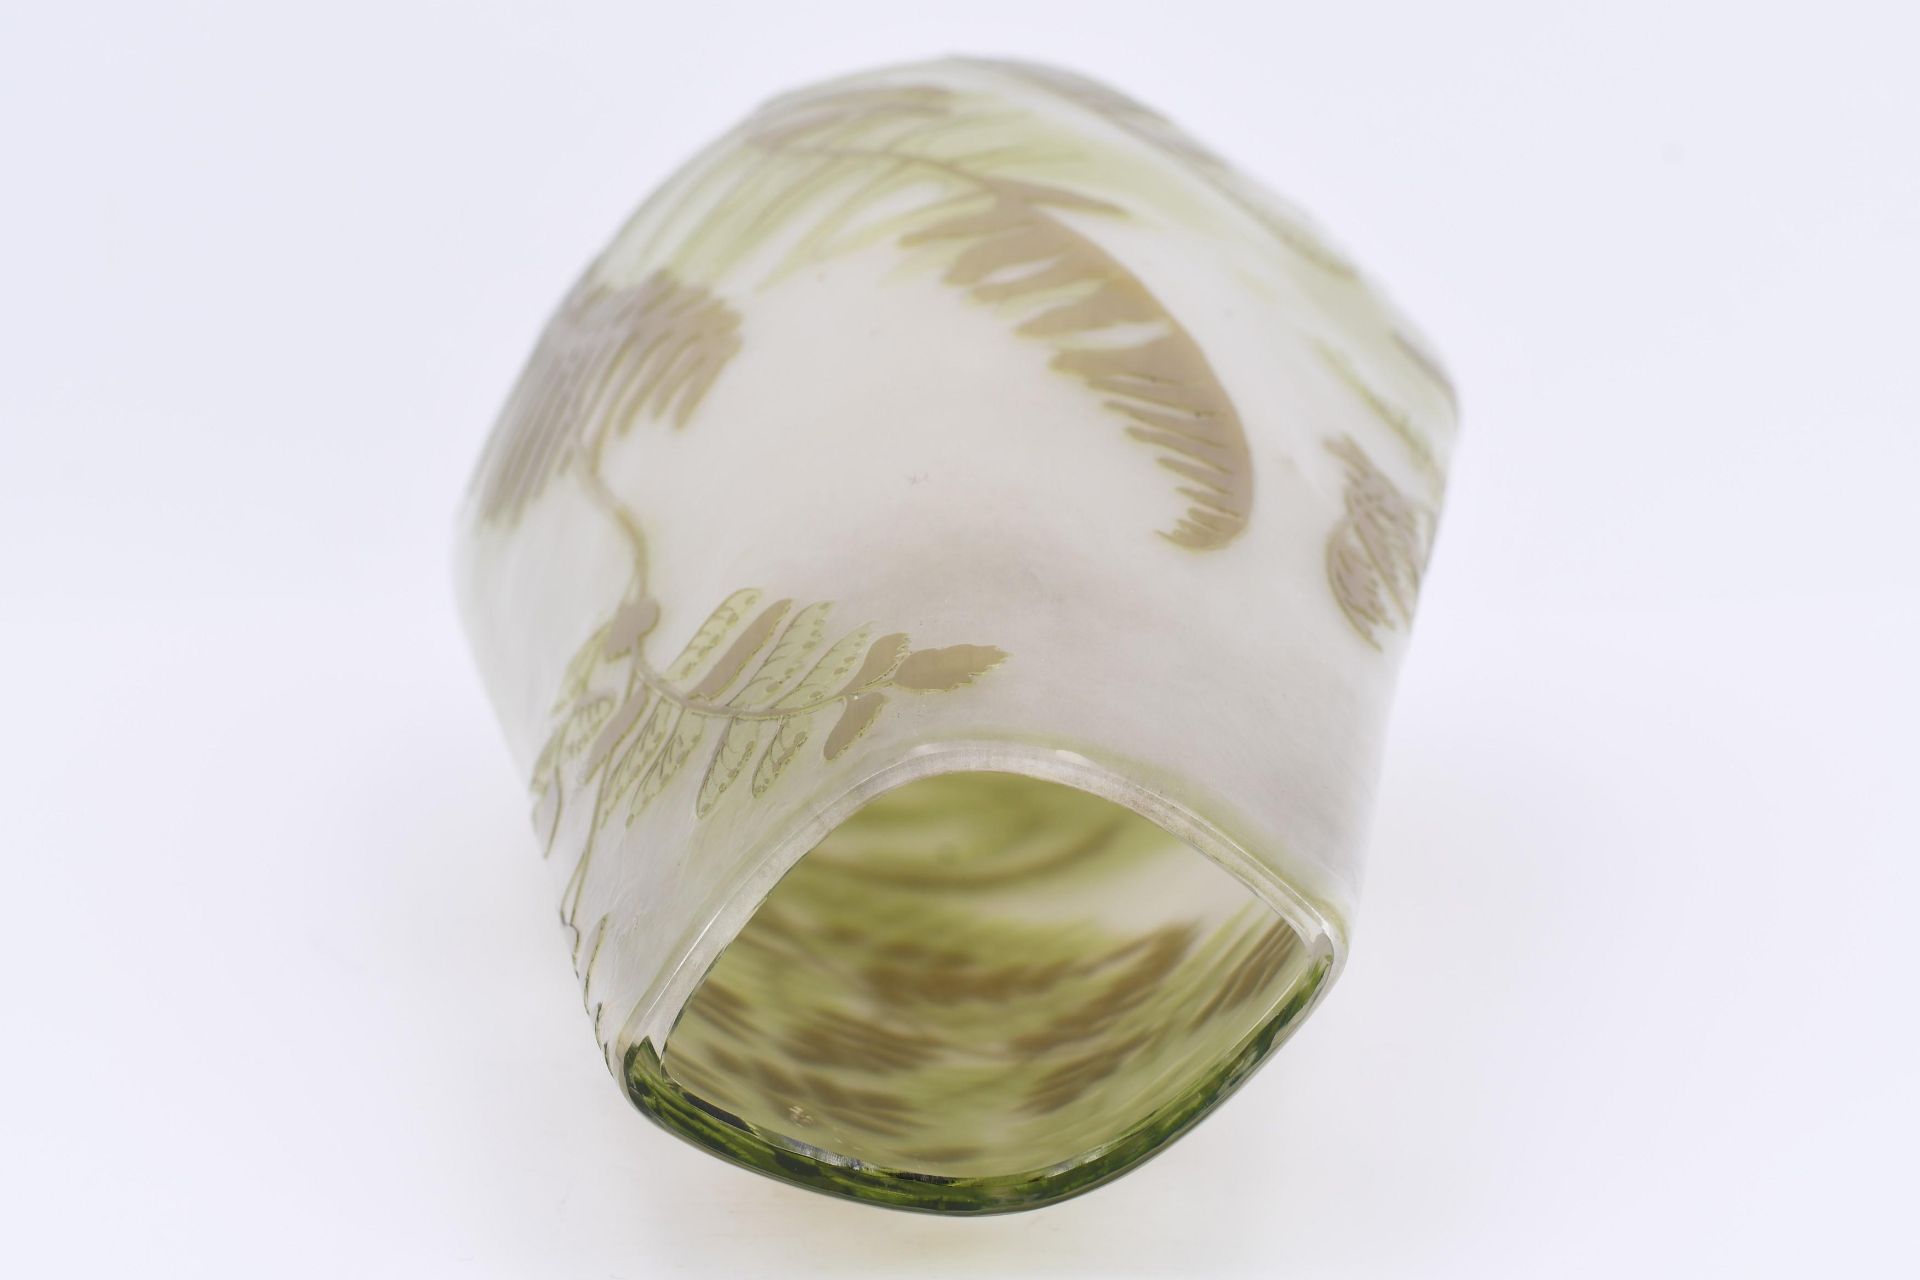 Small glass vase with floral décor - Image 12 of 13